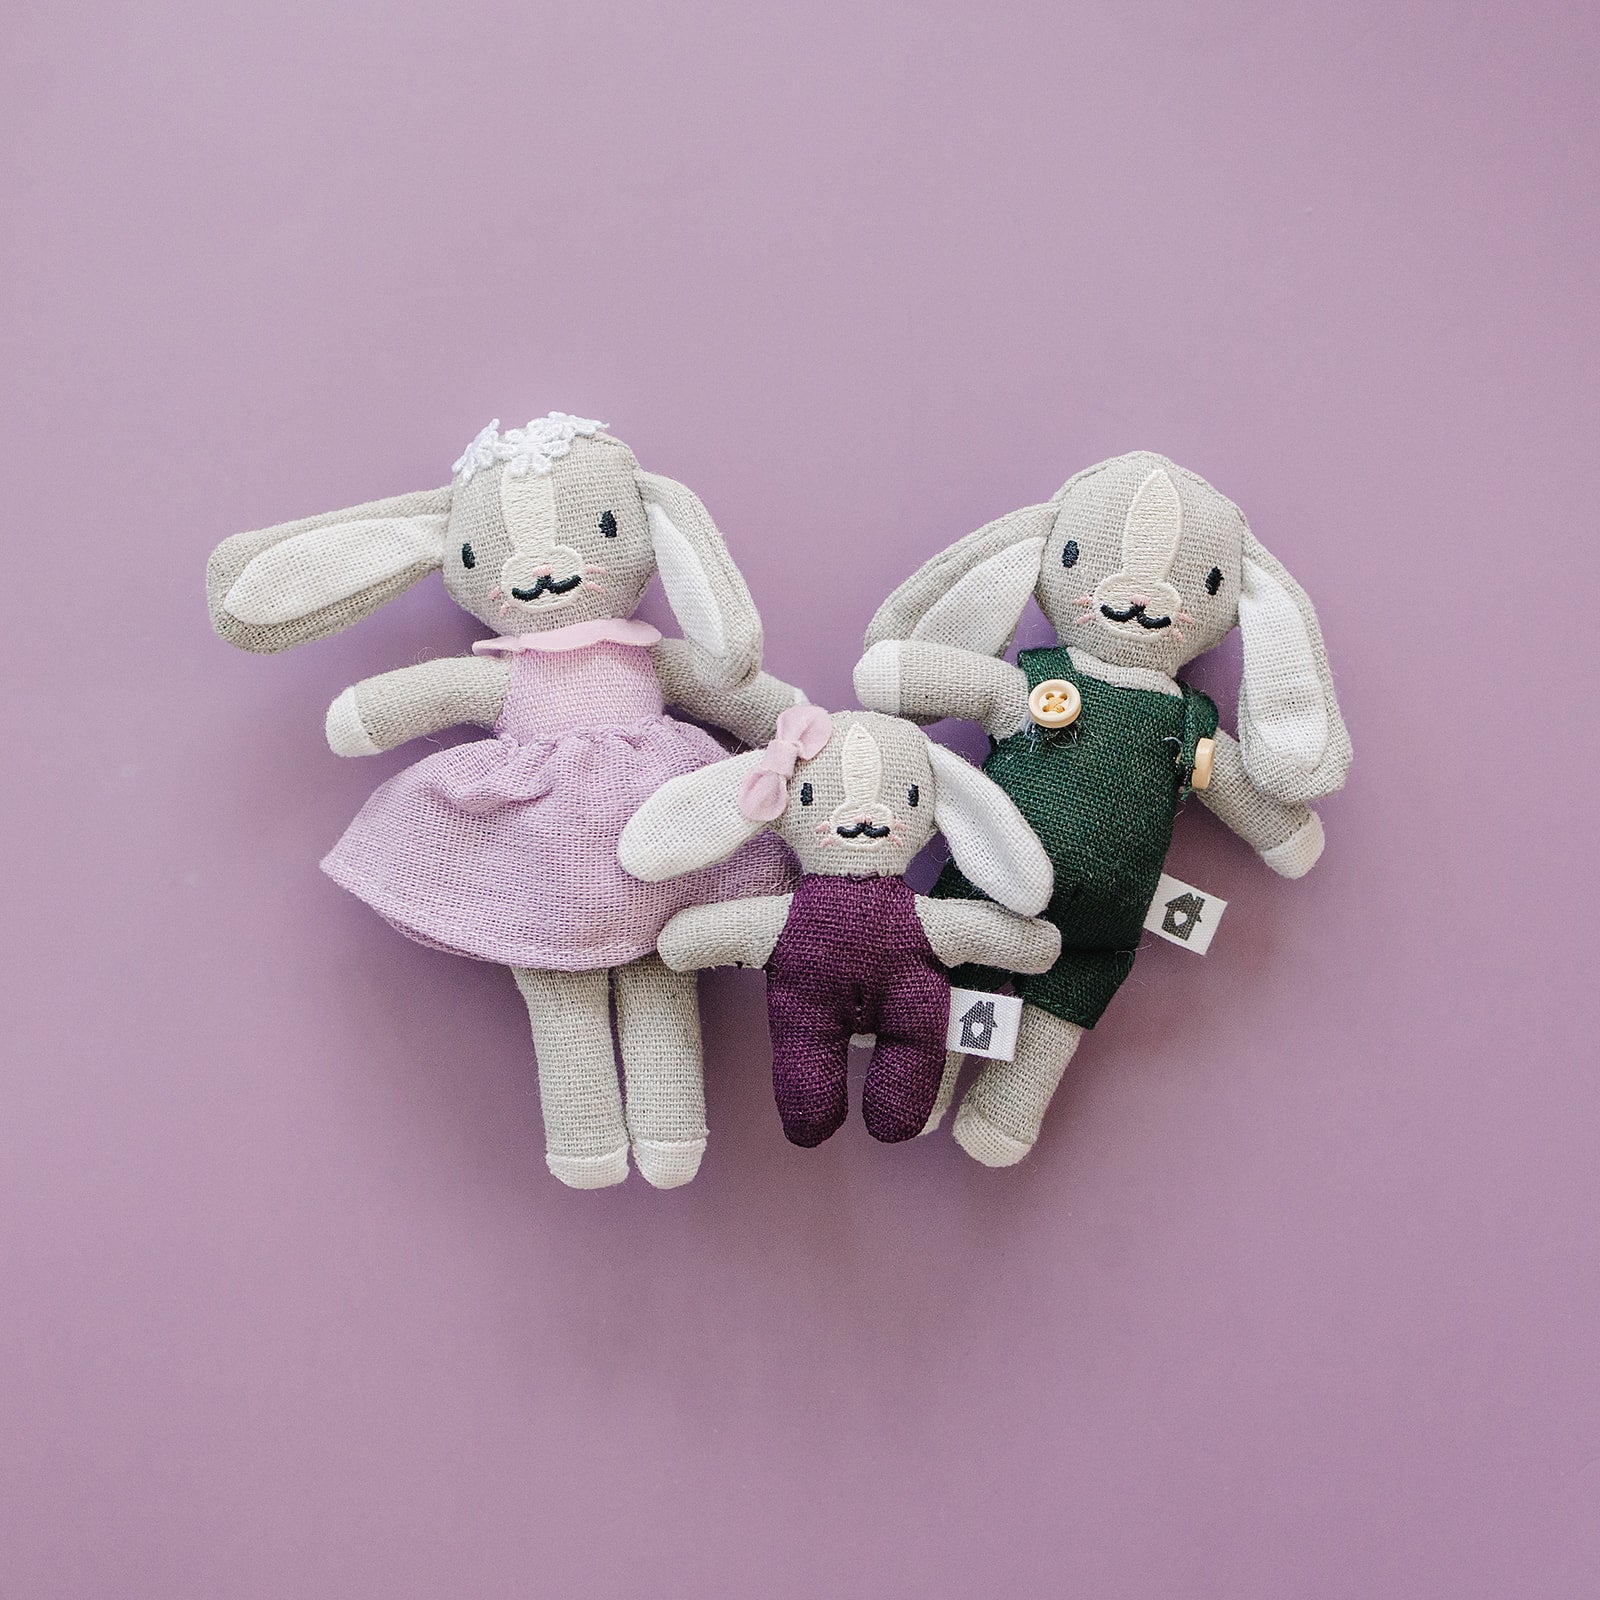 THE HOPE HAVEN PLUSH FAMILIES